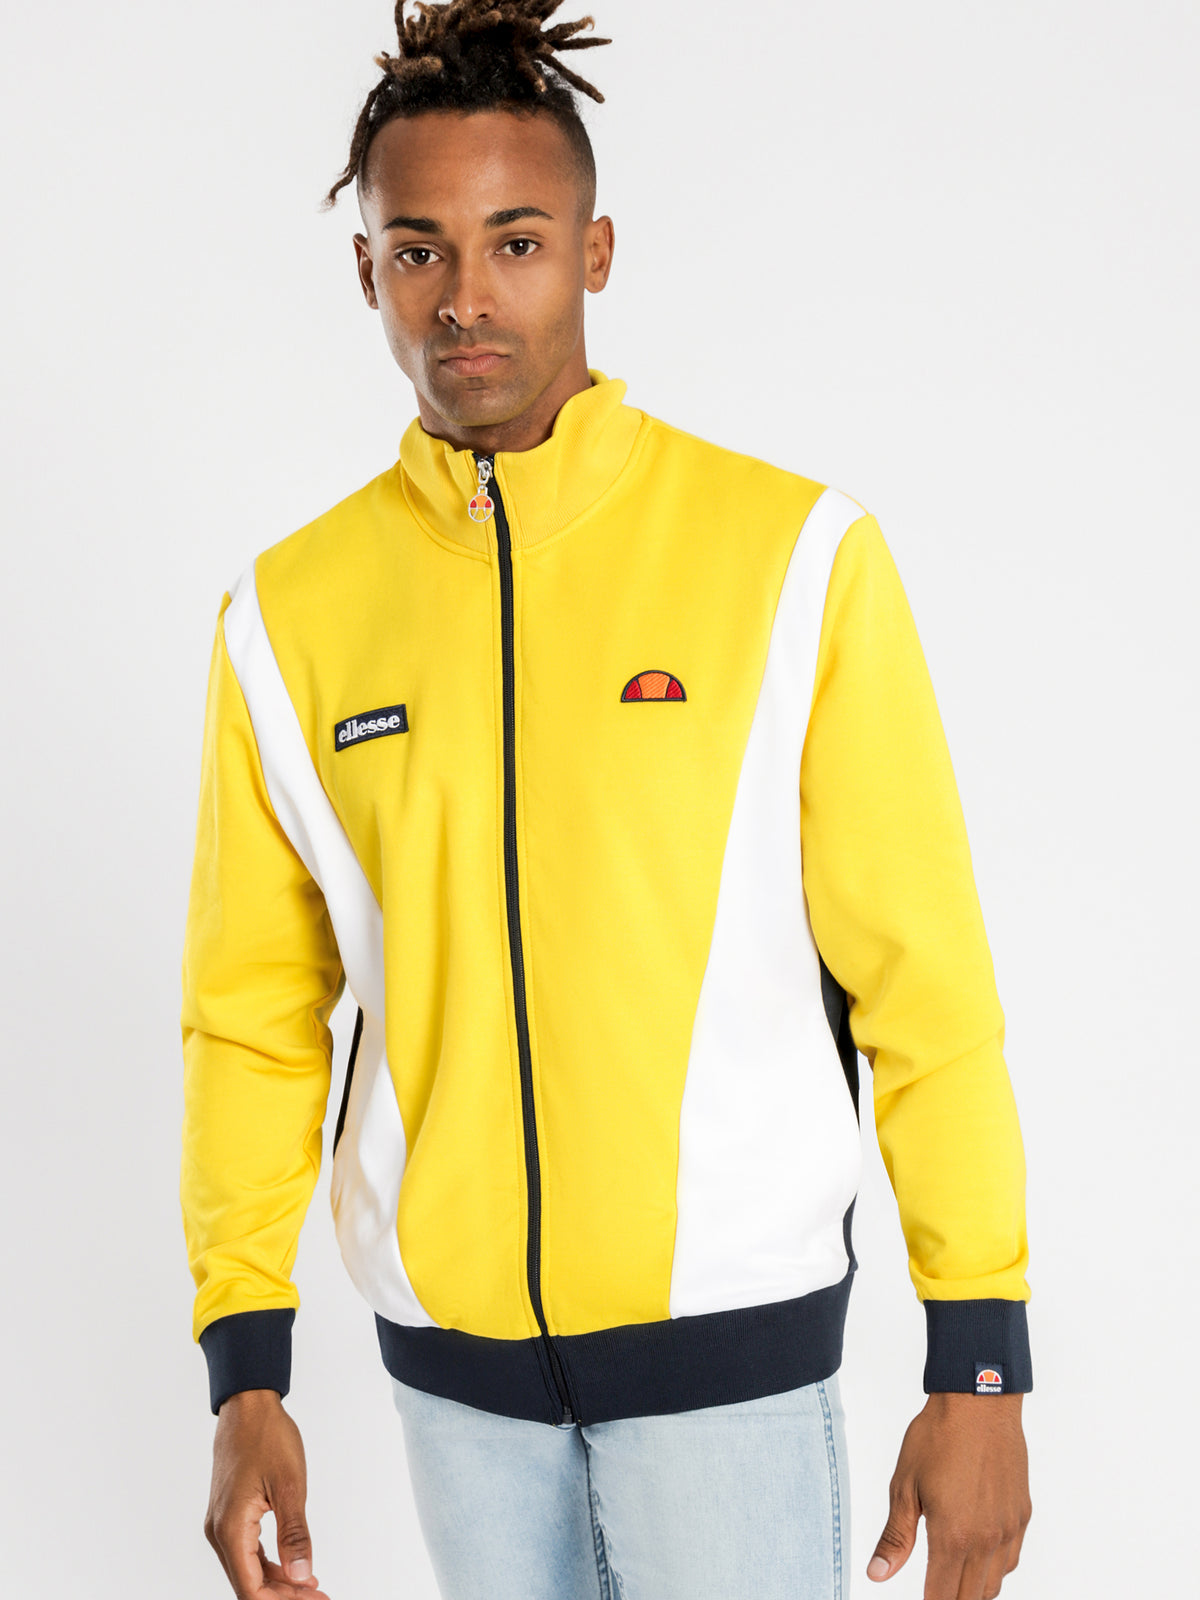 Vilas Track Jacket in Yellow White &amp; Navy